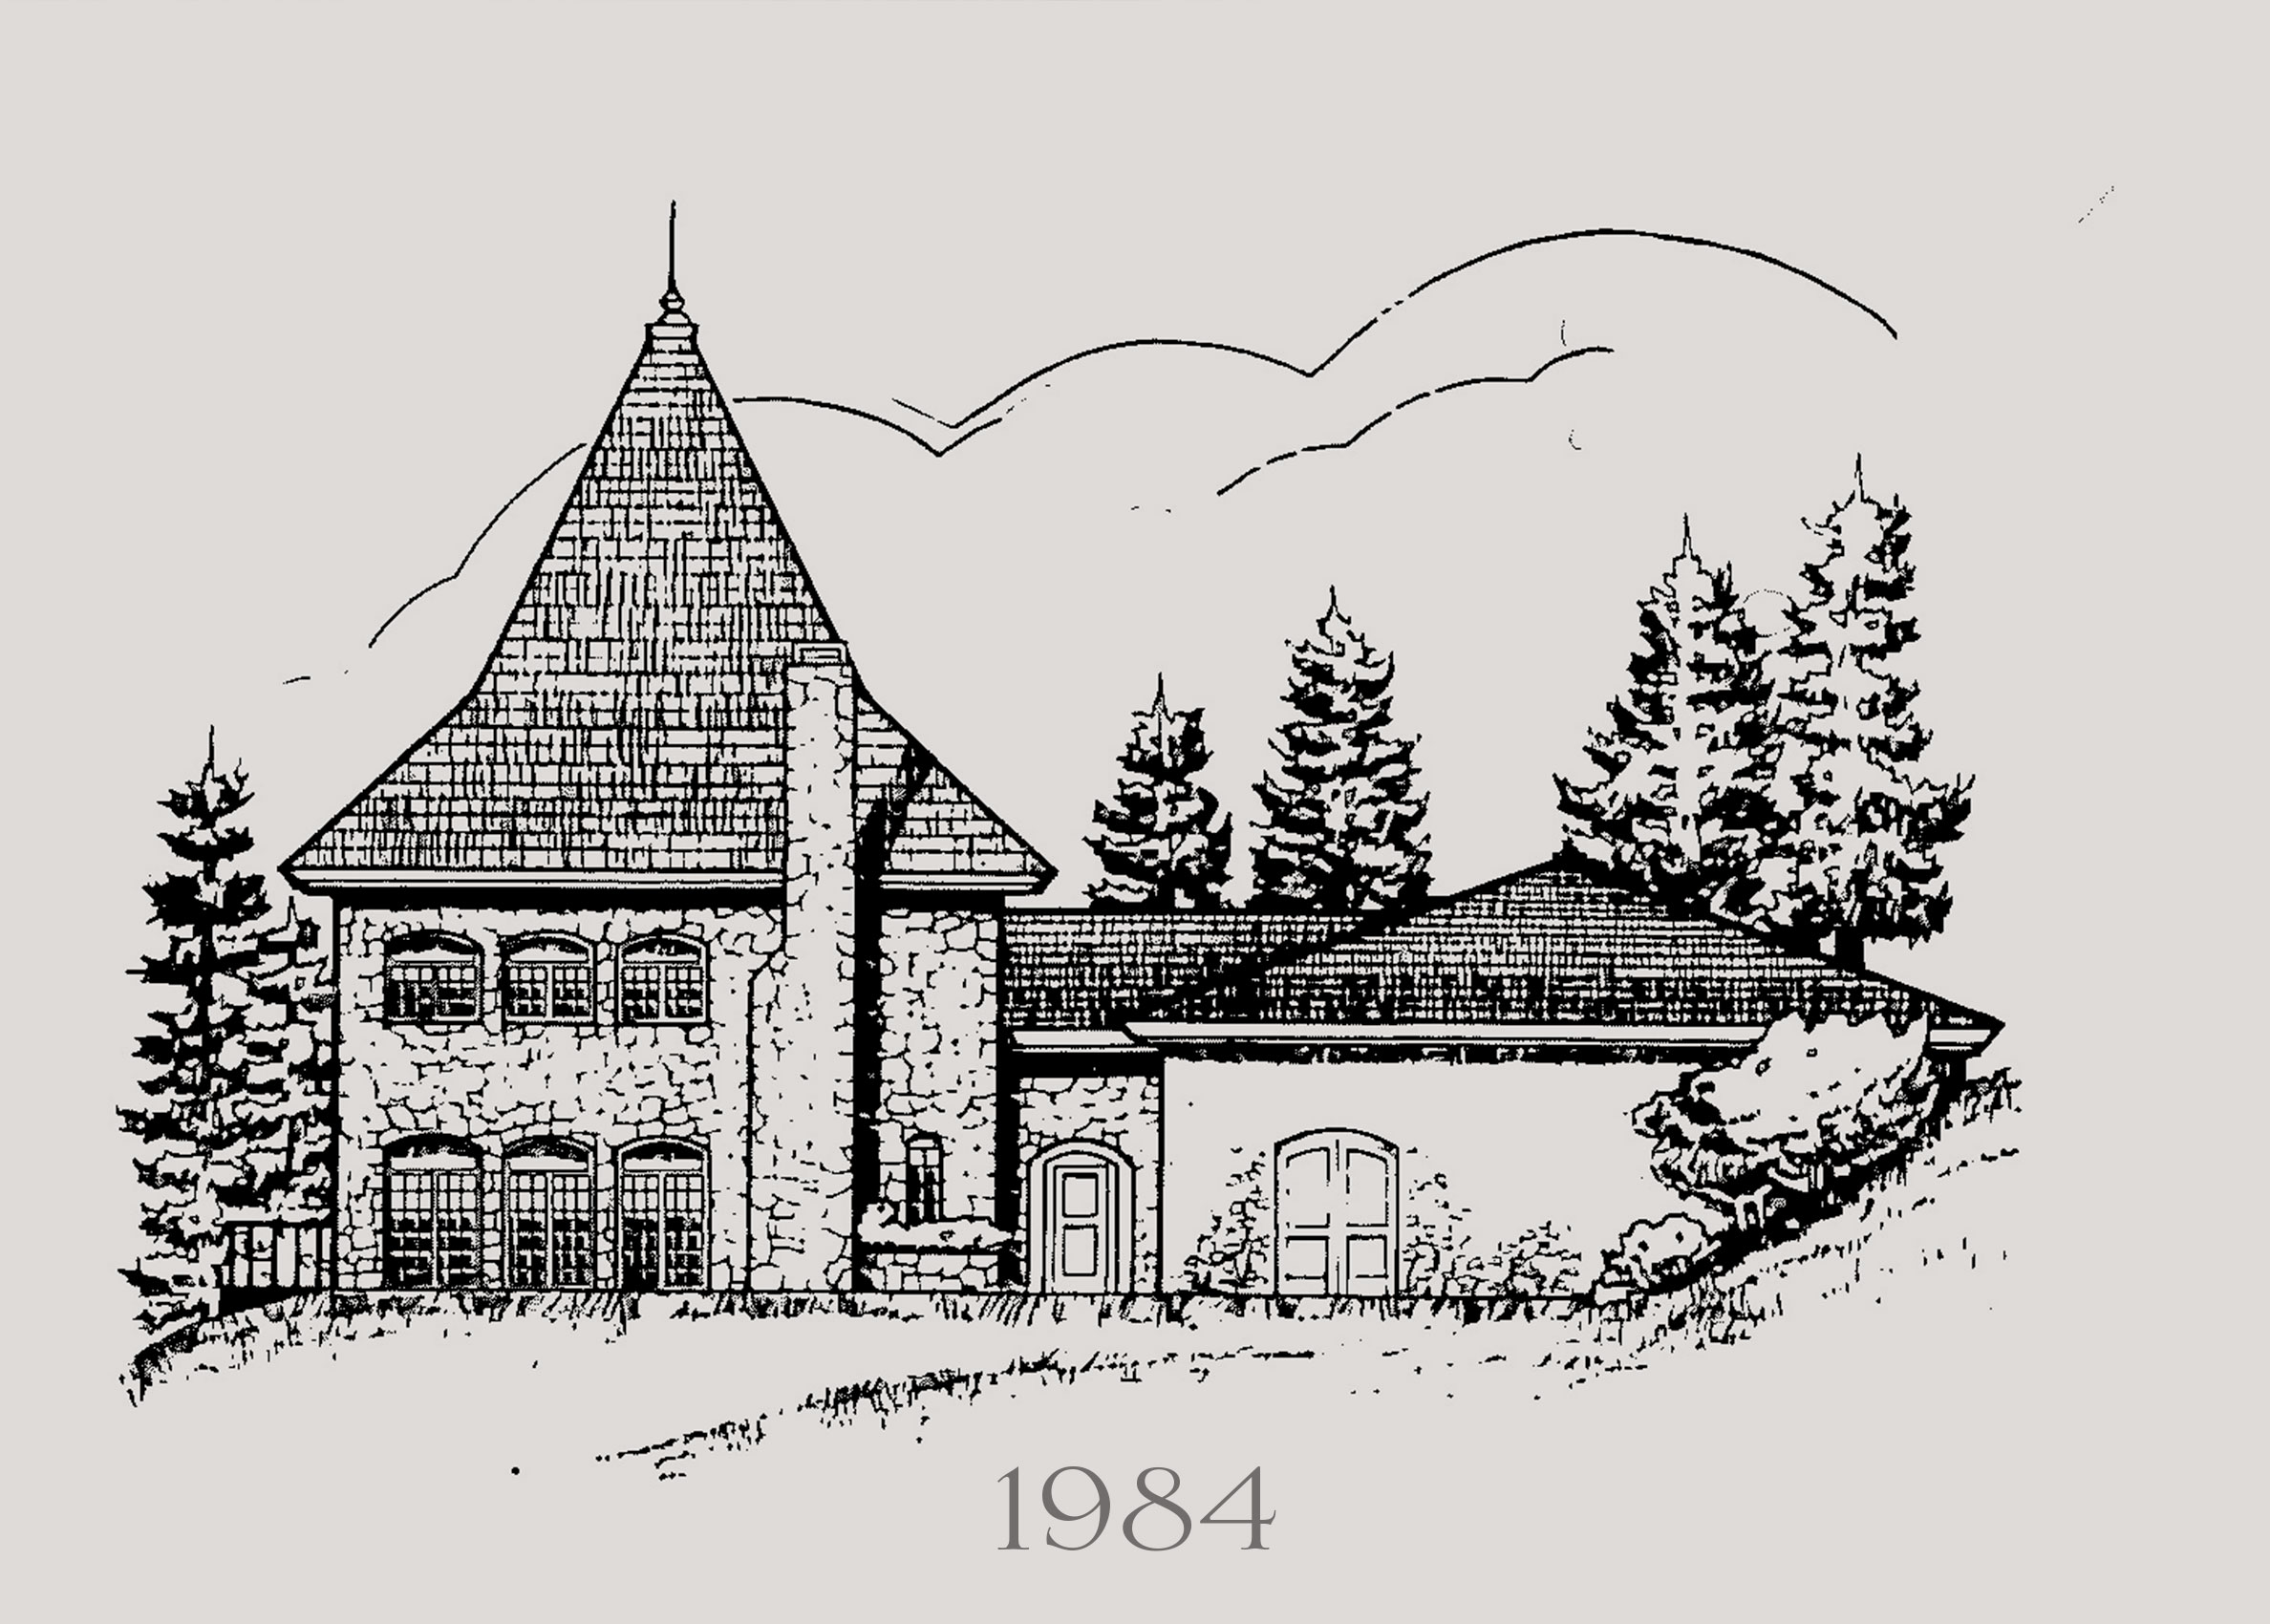 The Cain Cellar as it was built in 1984